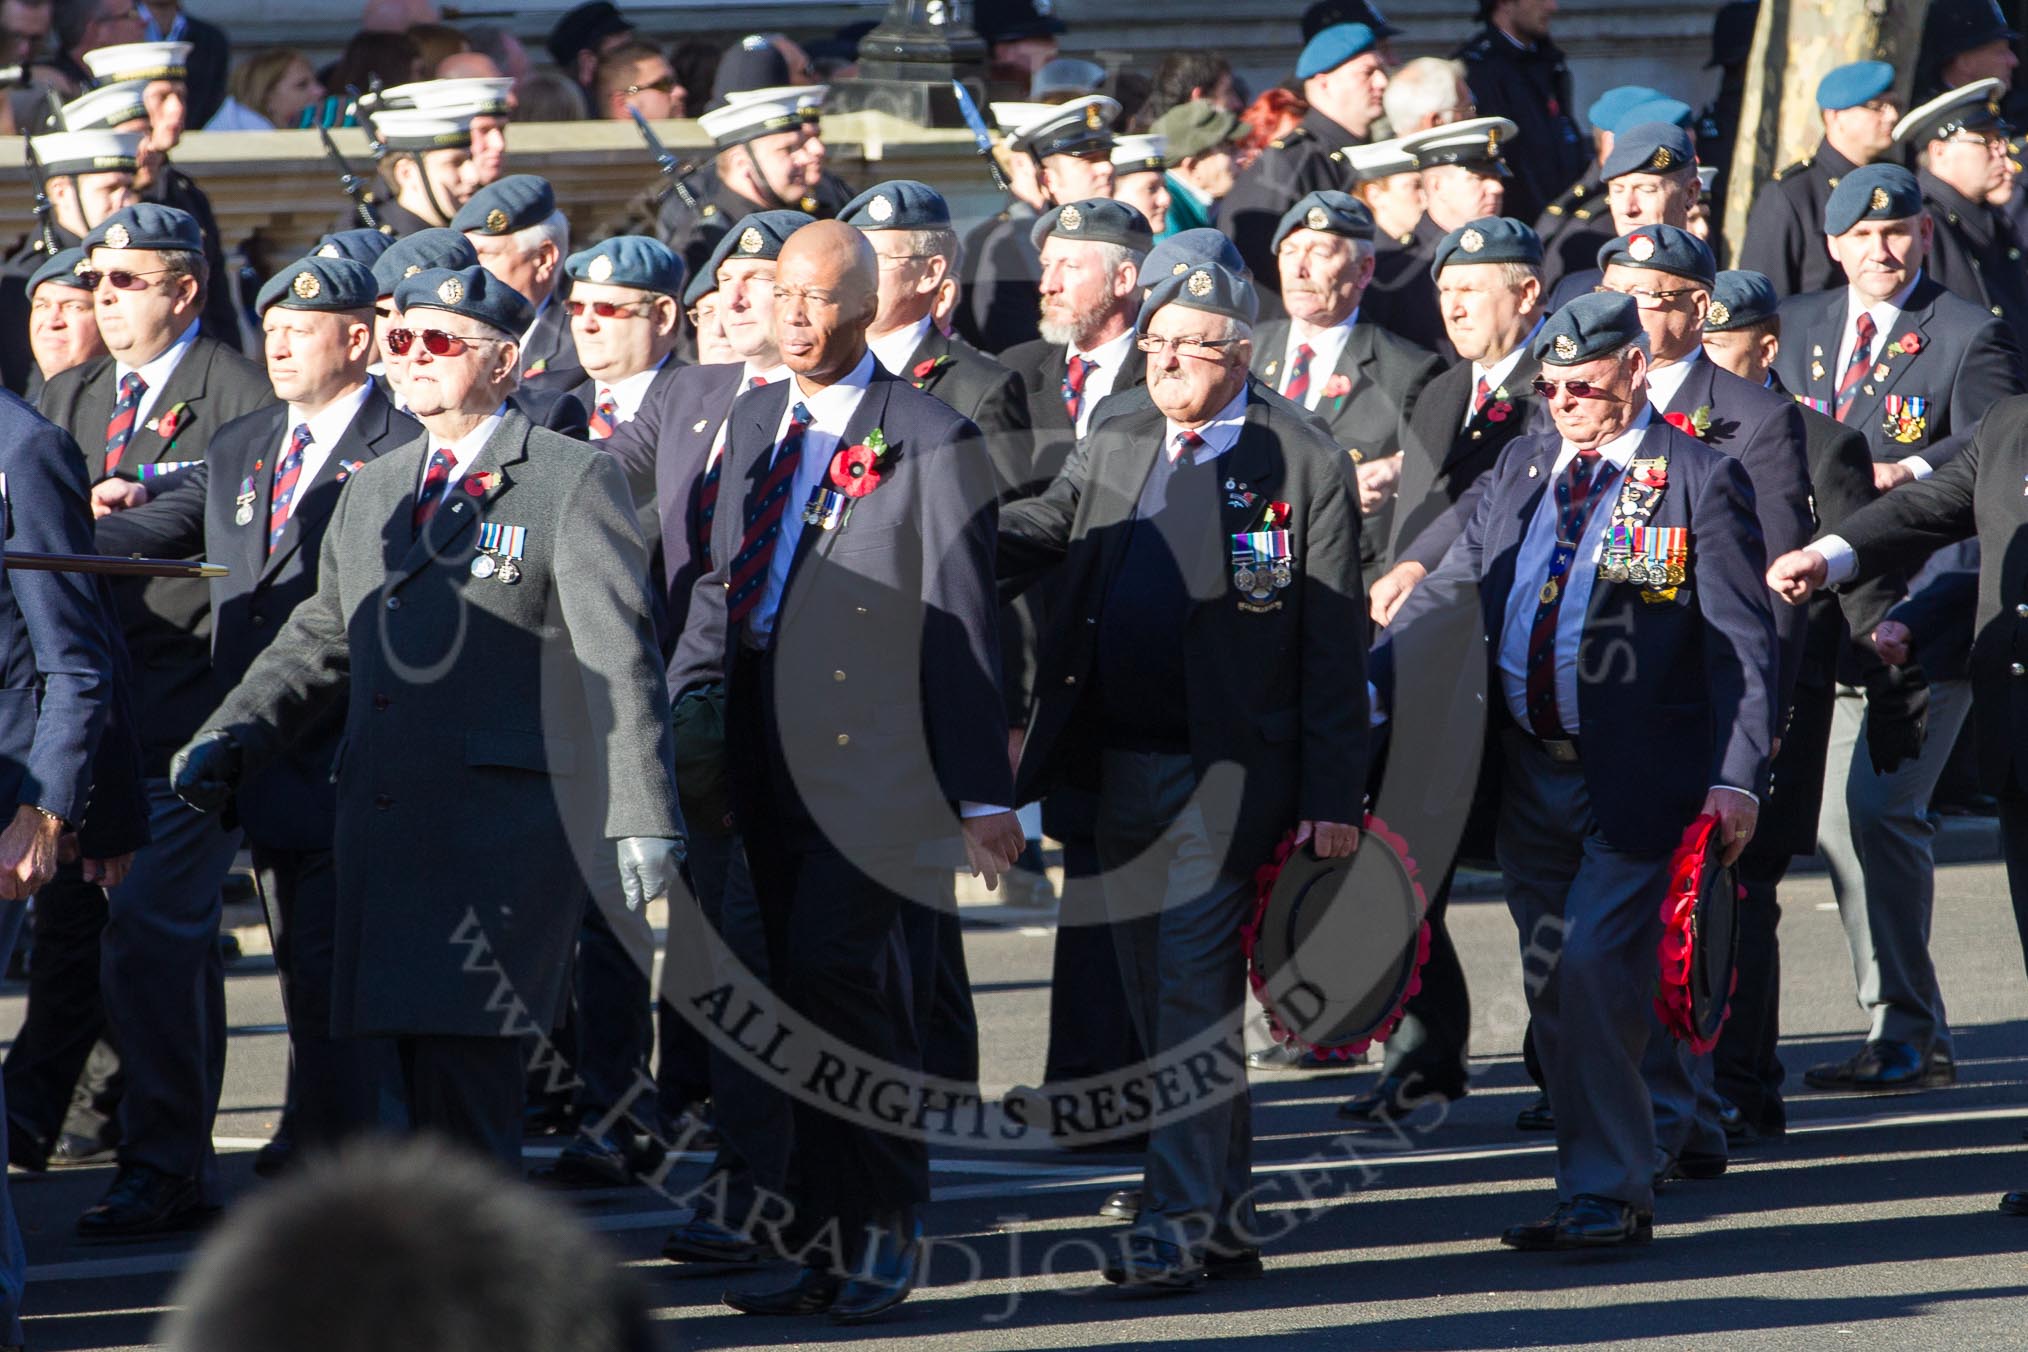 Remembrance Sunday 2012 Cenotaph March Past: Group C2 - Royal Air Force Regiment Association..
Whitehall, Cenotaph,
London SW1,

United Kingdom,
on 11 November 2012 at 12:00, image #1048